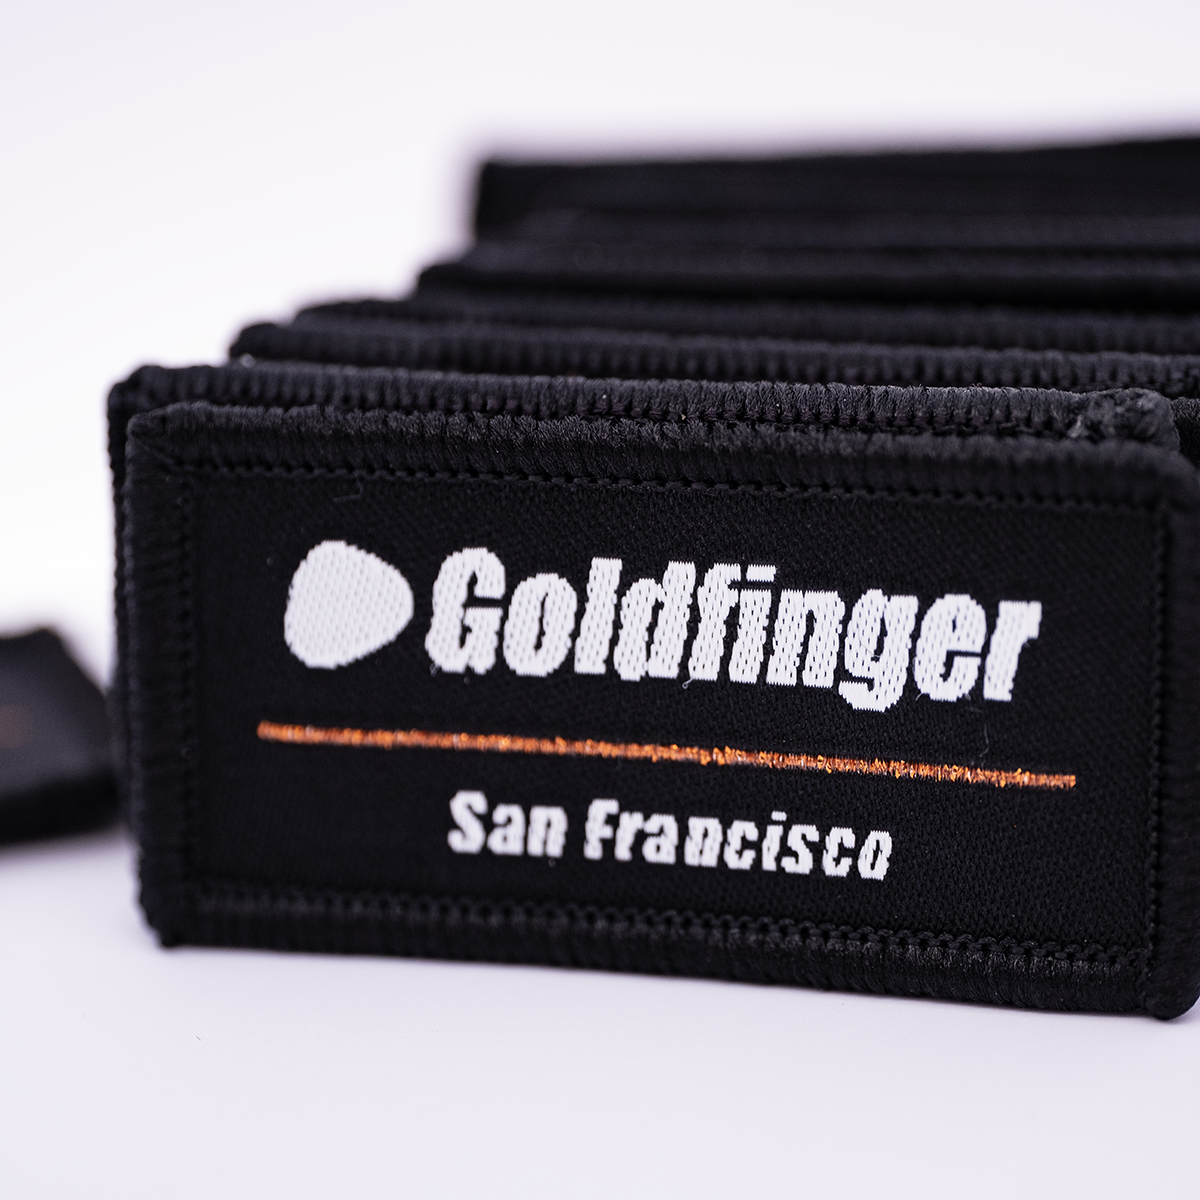 Goldfinger Patch - Low Profile Edition